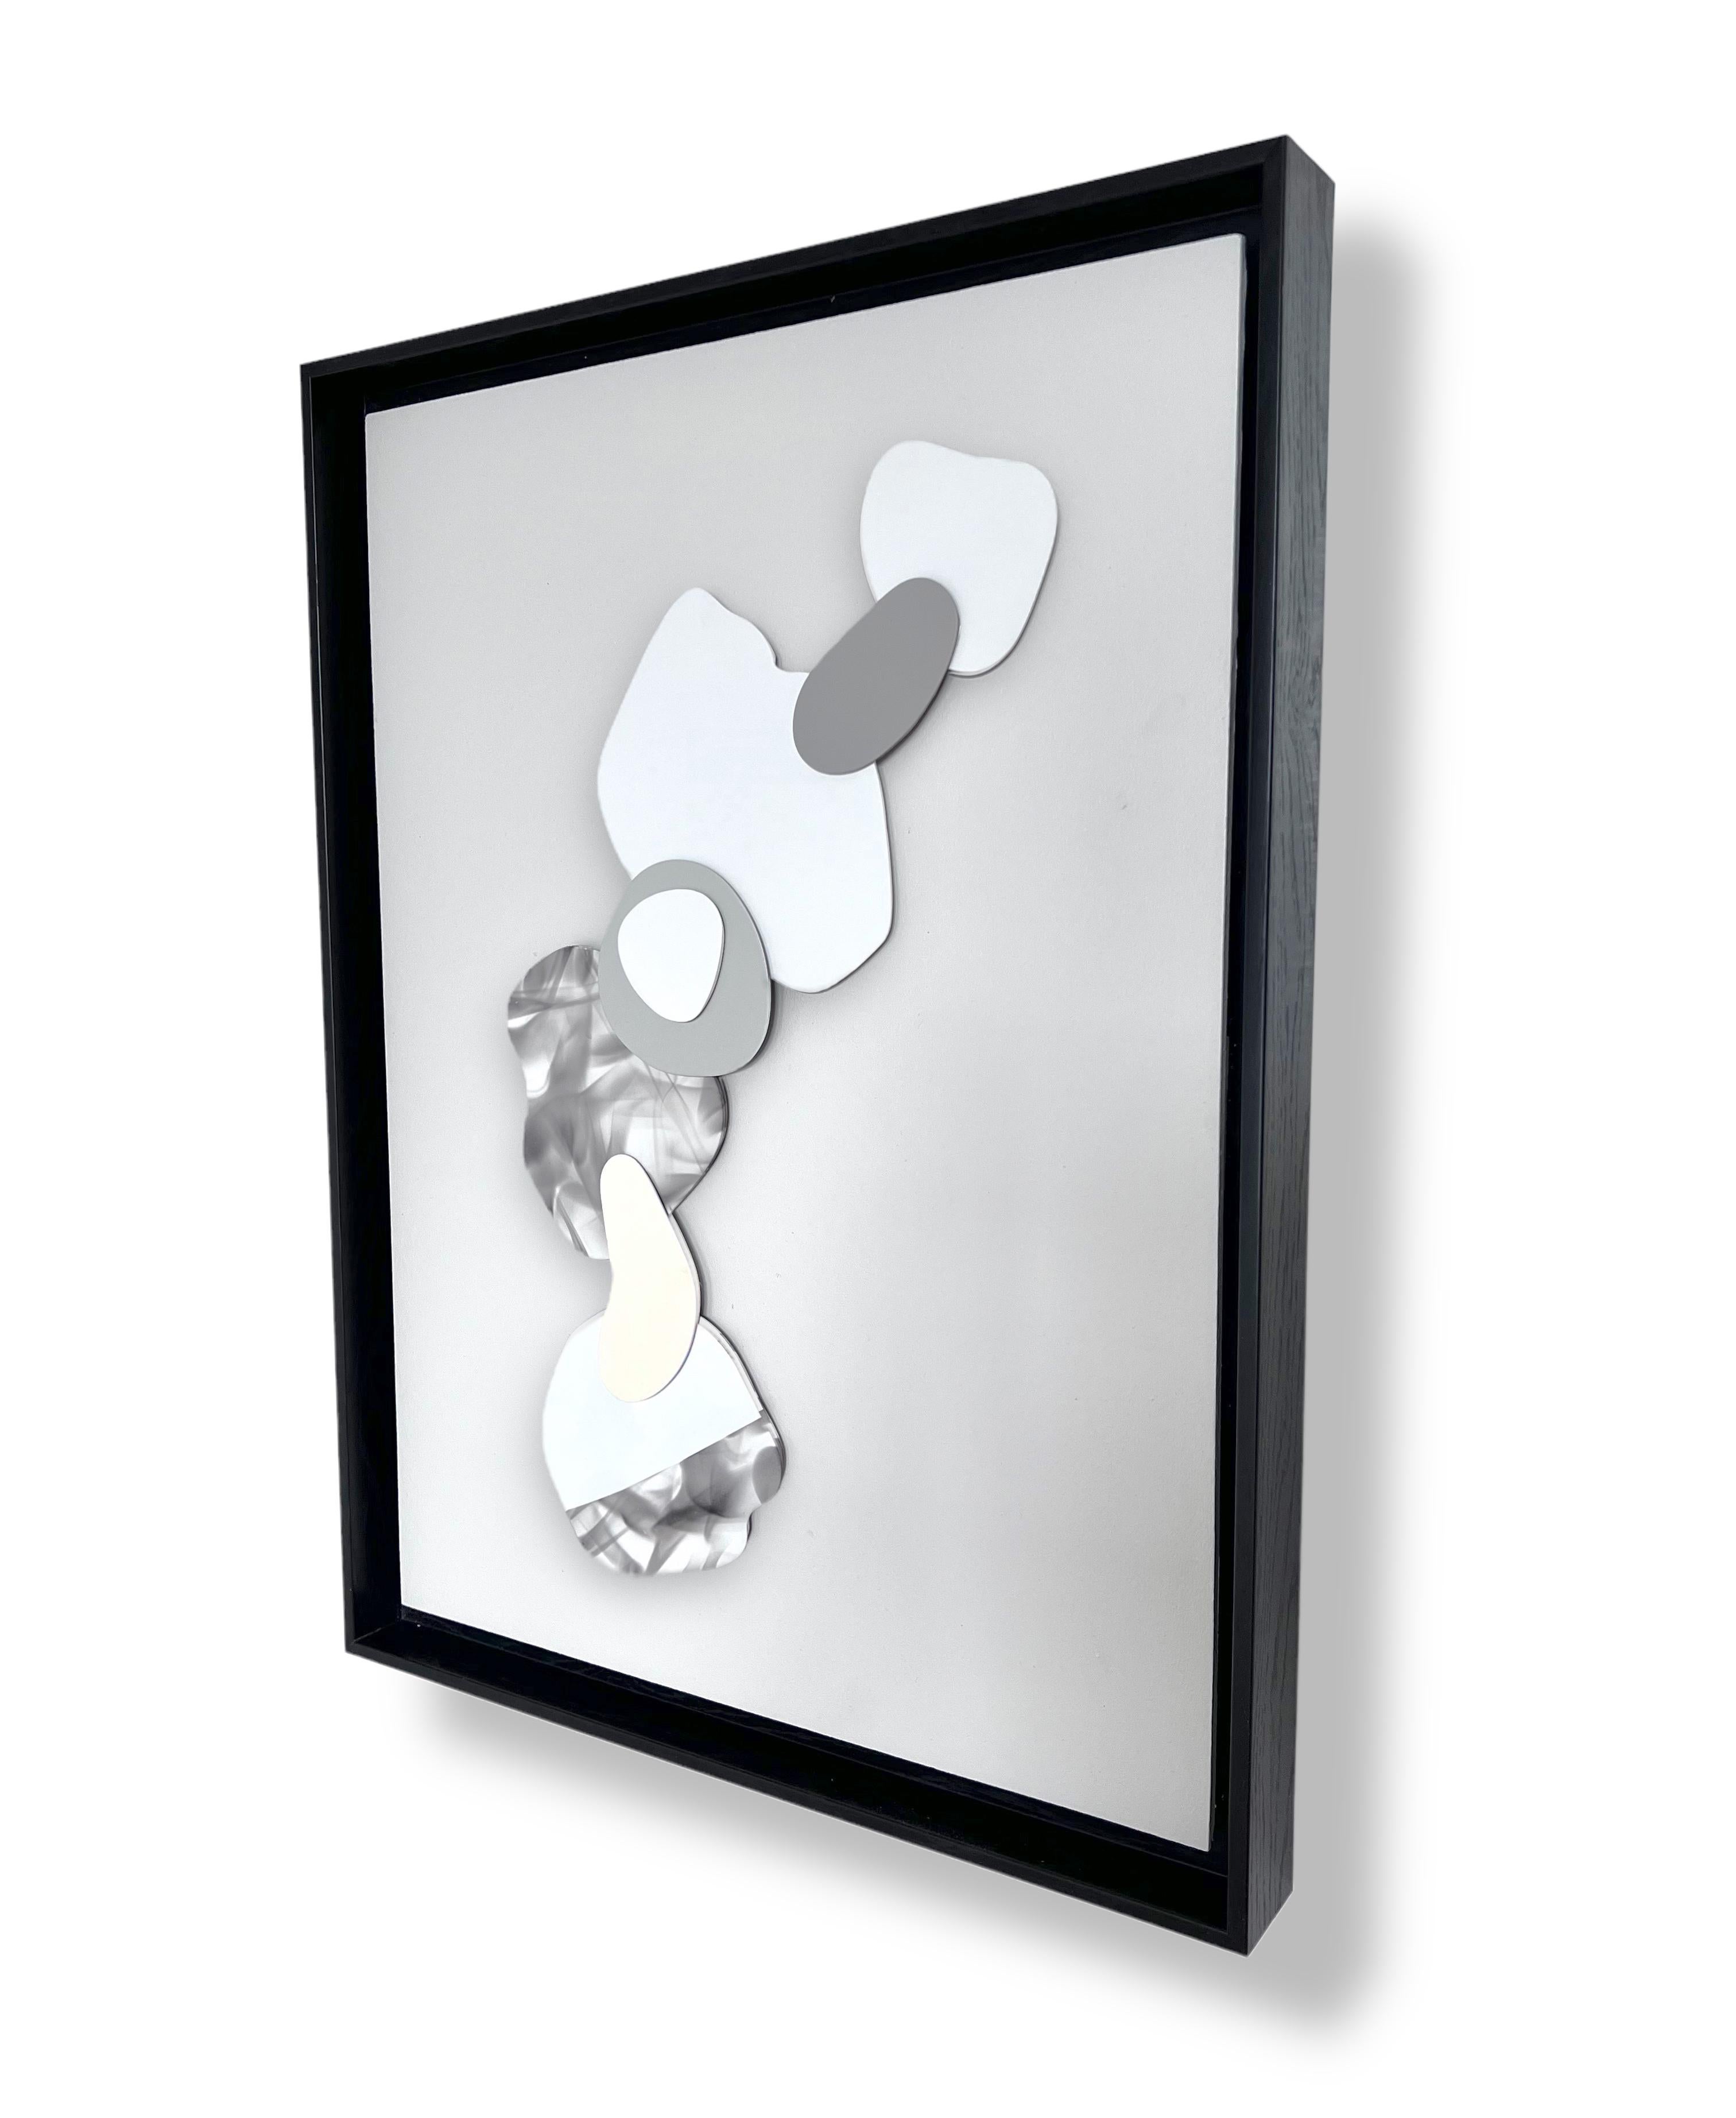 Clouds I . 2022 
Mixed Media abstract, minimalistic, 3D painting on wood panel mounted on a deep floater black frame  18.75H x 24.75W x 2D  
It is a 3D painting, composed of small pieces of plaster painted with neutral colors as well as smoke. The